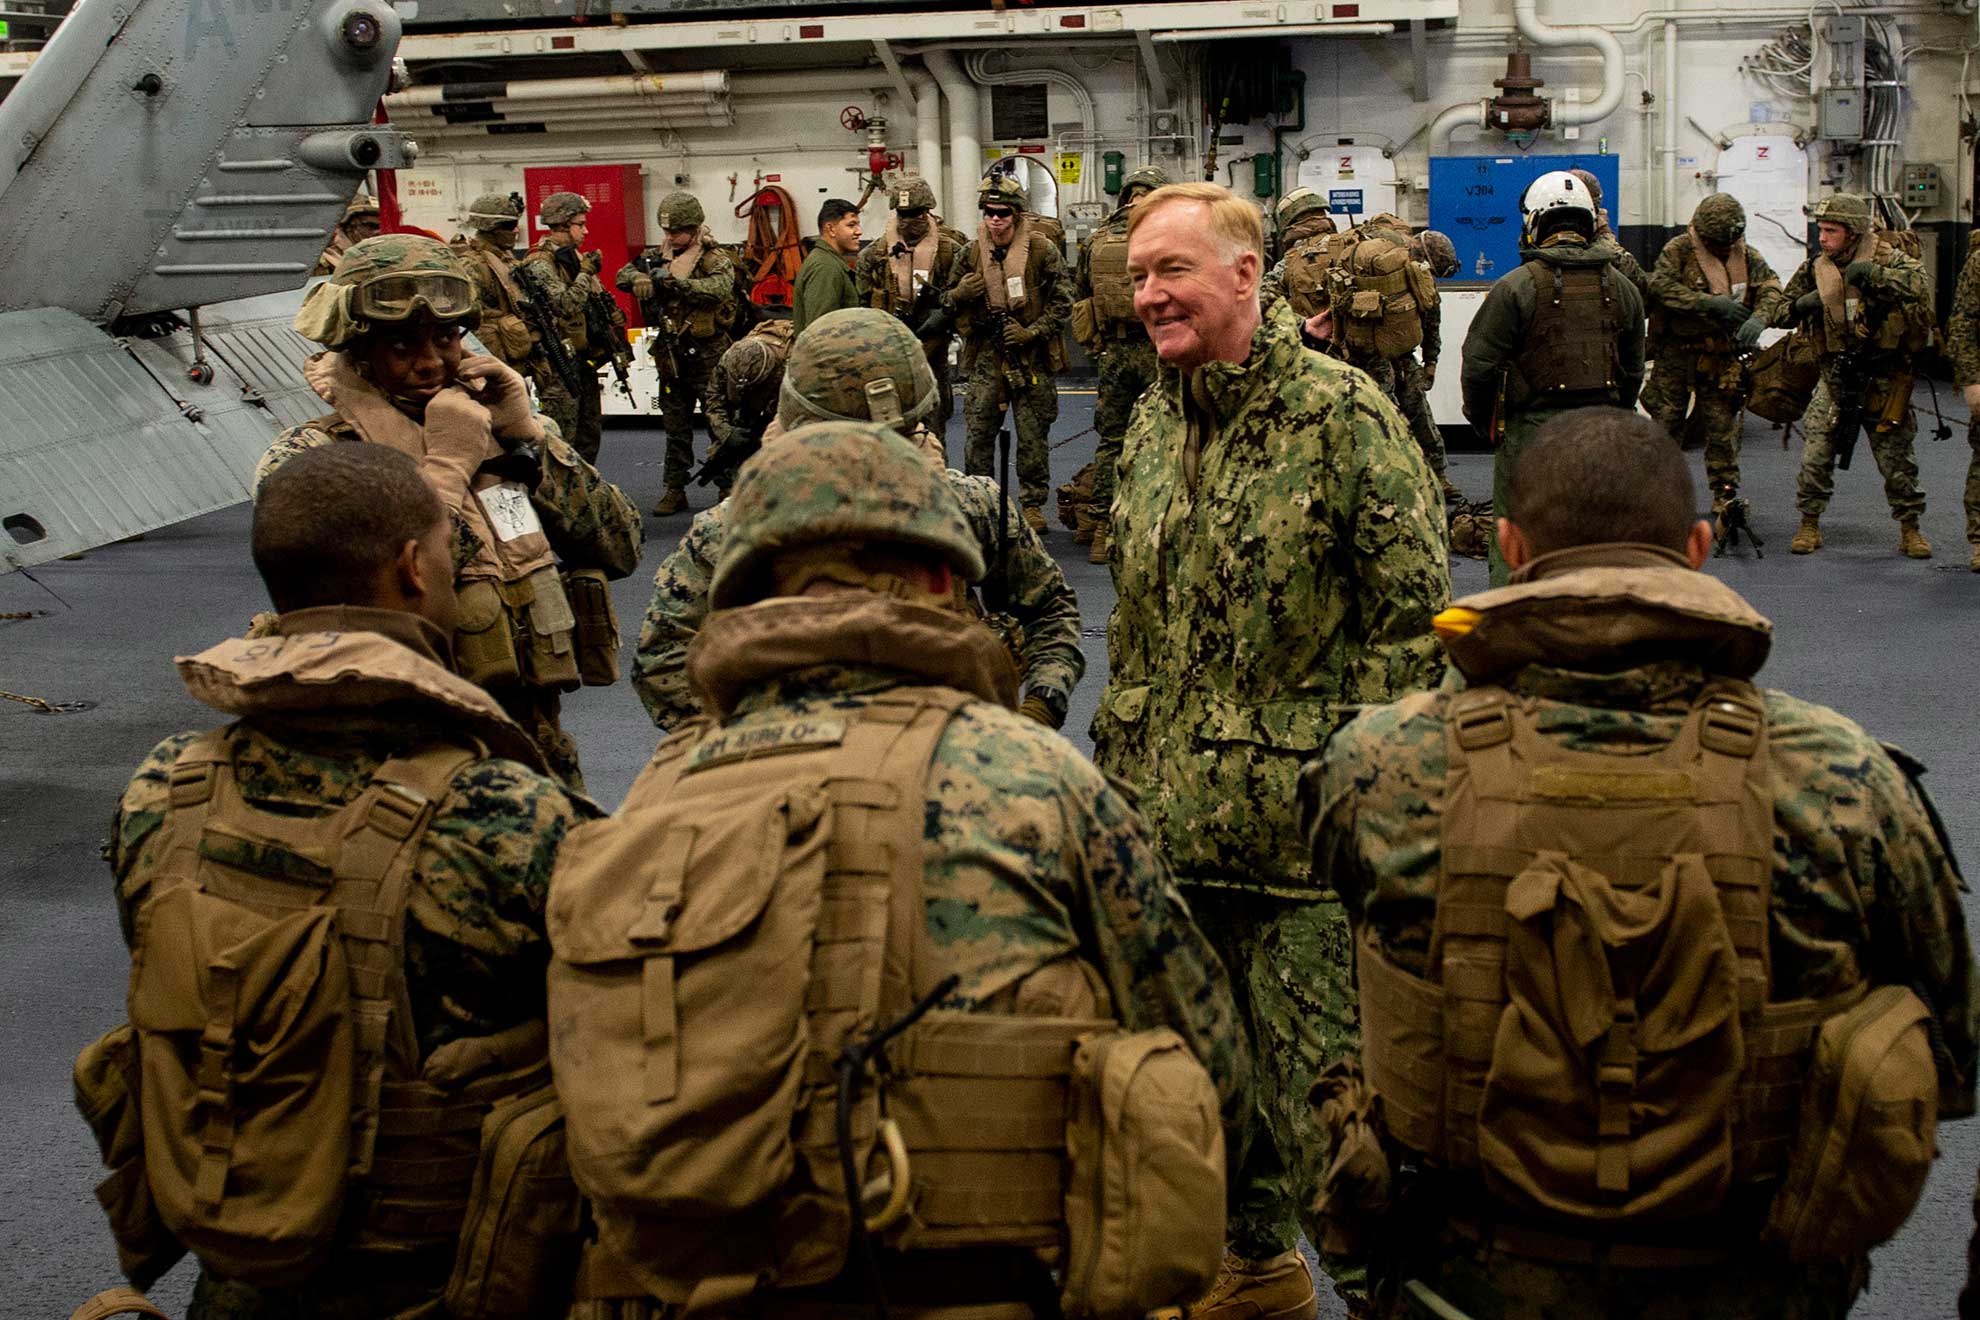 Atlantic Ocean (Oct. 17, 2018) Adm. James G. Foggo III, commander of U.S. Naval Forces Europe-Africa and Allied Joint Force Command Naples, speaks to Marines in the hangar bay aboard the Wasp-class amphibious assault ship USS Iwo Jima (LHD 7), Oct. 17, 2018. Iwo Jima is underway prior to participating in Trident Juncture 2018 which is a NATO-led exercise designed to certify NATO response forces and develop interoperability among participating NATO and partner nations -- U.S. Navy photo by MCS3 Joe J. Cardona Gonzalez. -